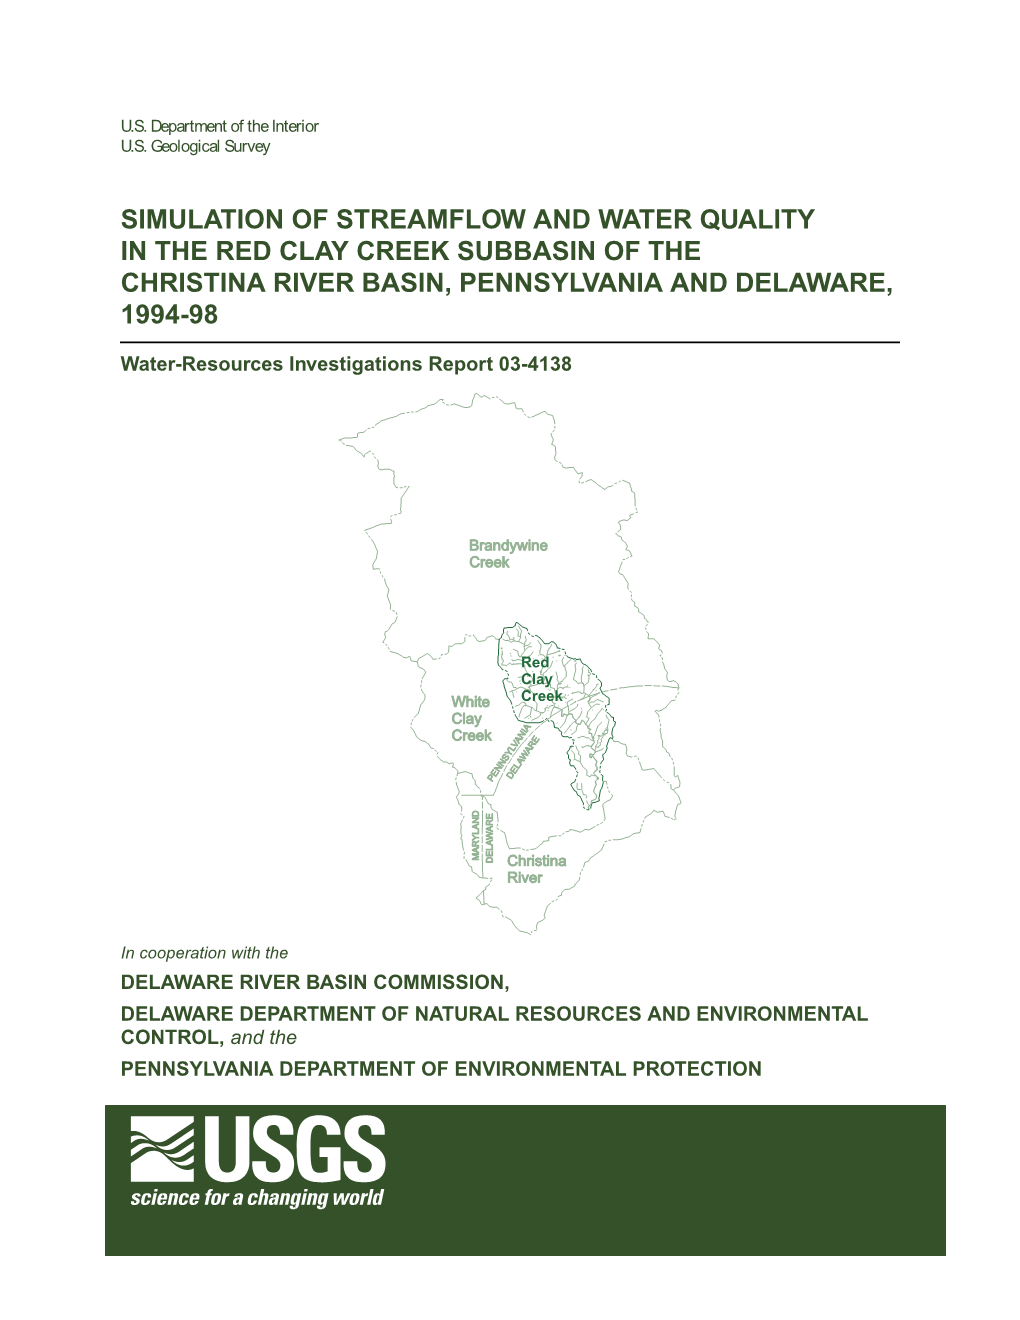 Simulation of Streamflow and Water Quality in the Red Clay Creek Subbasin of the Christina River Basin, Pennsylvania and Delaware, 1994-98